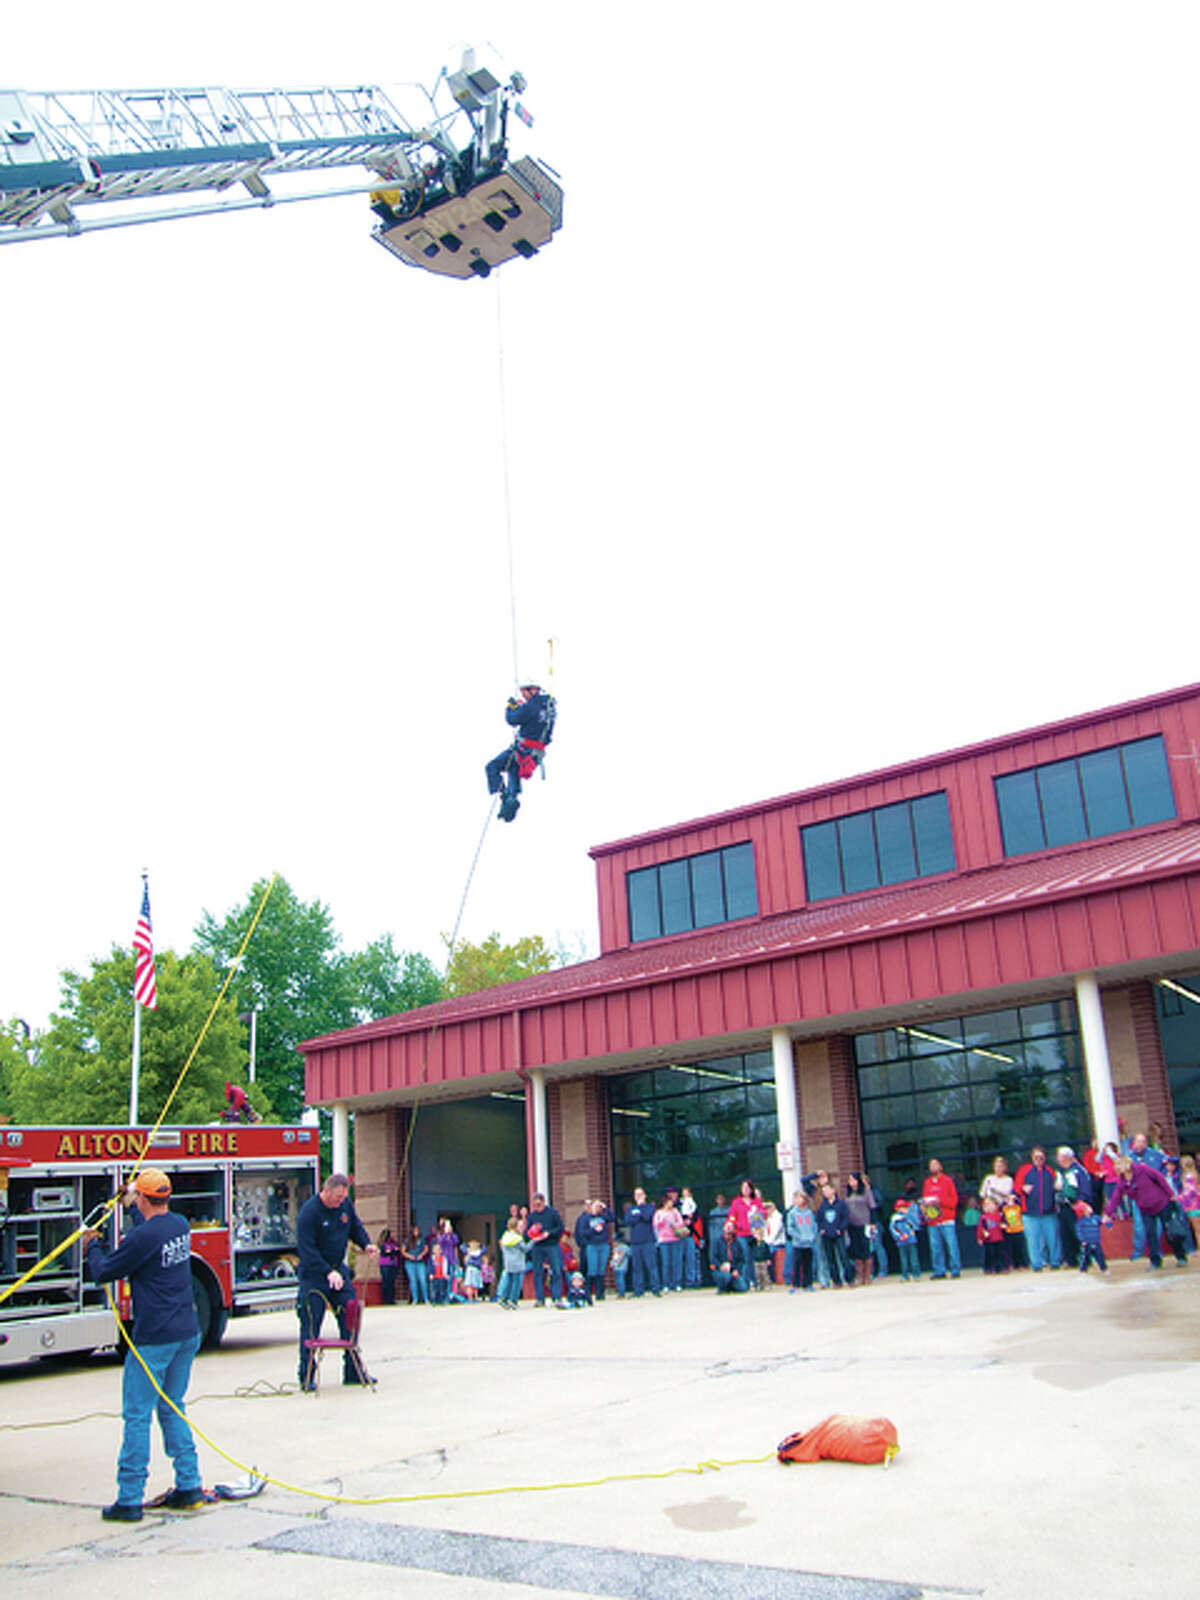 A crowd of people watches Cliff Holshouser of the Alton Fire Departments Tactical Rescue Unit repel down from 75 feet in the air to simulate a rescue on difficult terrain.